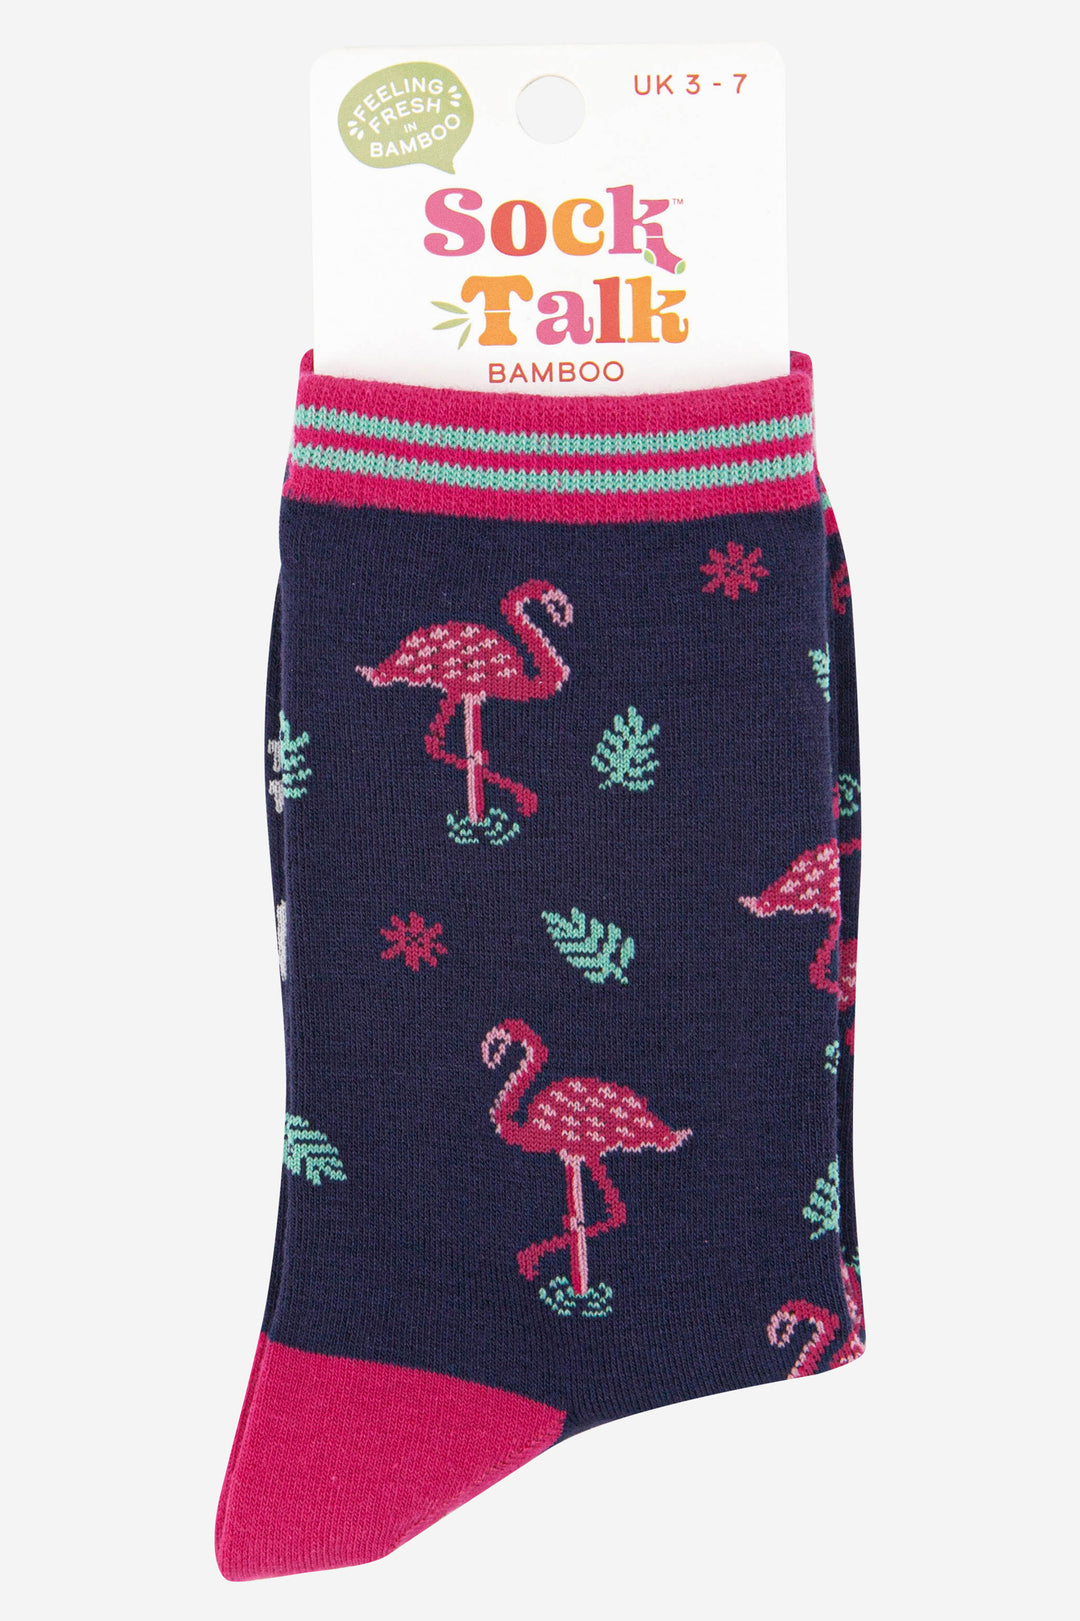 womens flamingo bamboo socks in navy and pink uk size 3-7